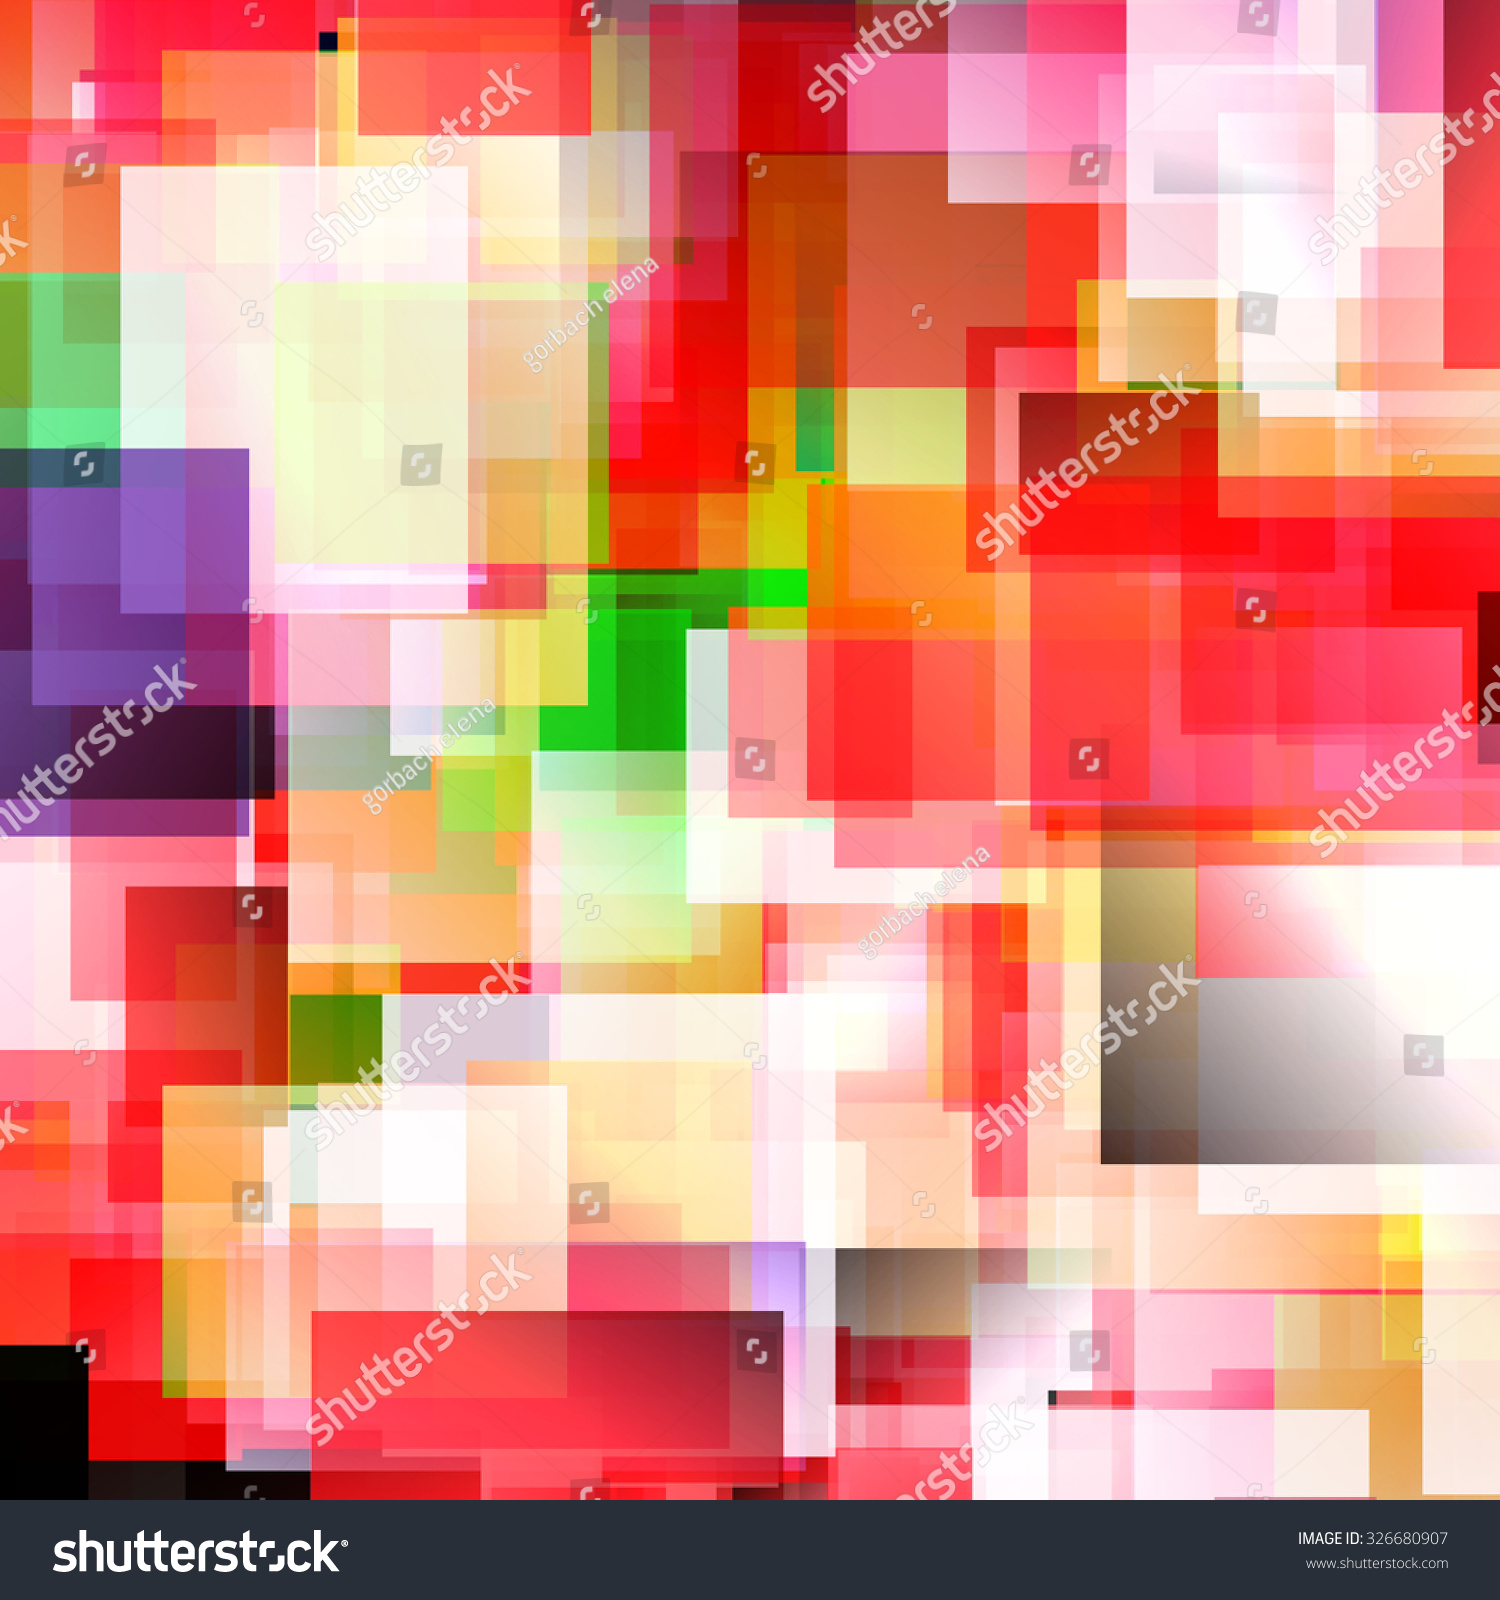 Red White Yellow Rectangle Polygon Background Stock Vector 326680907 ...